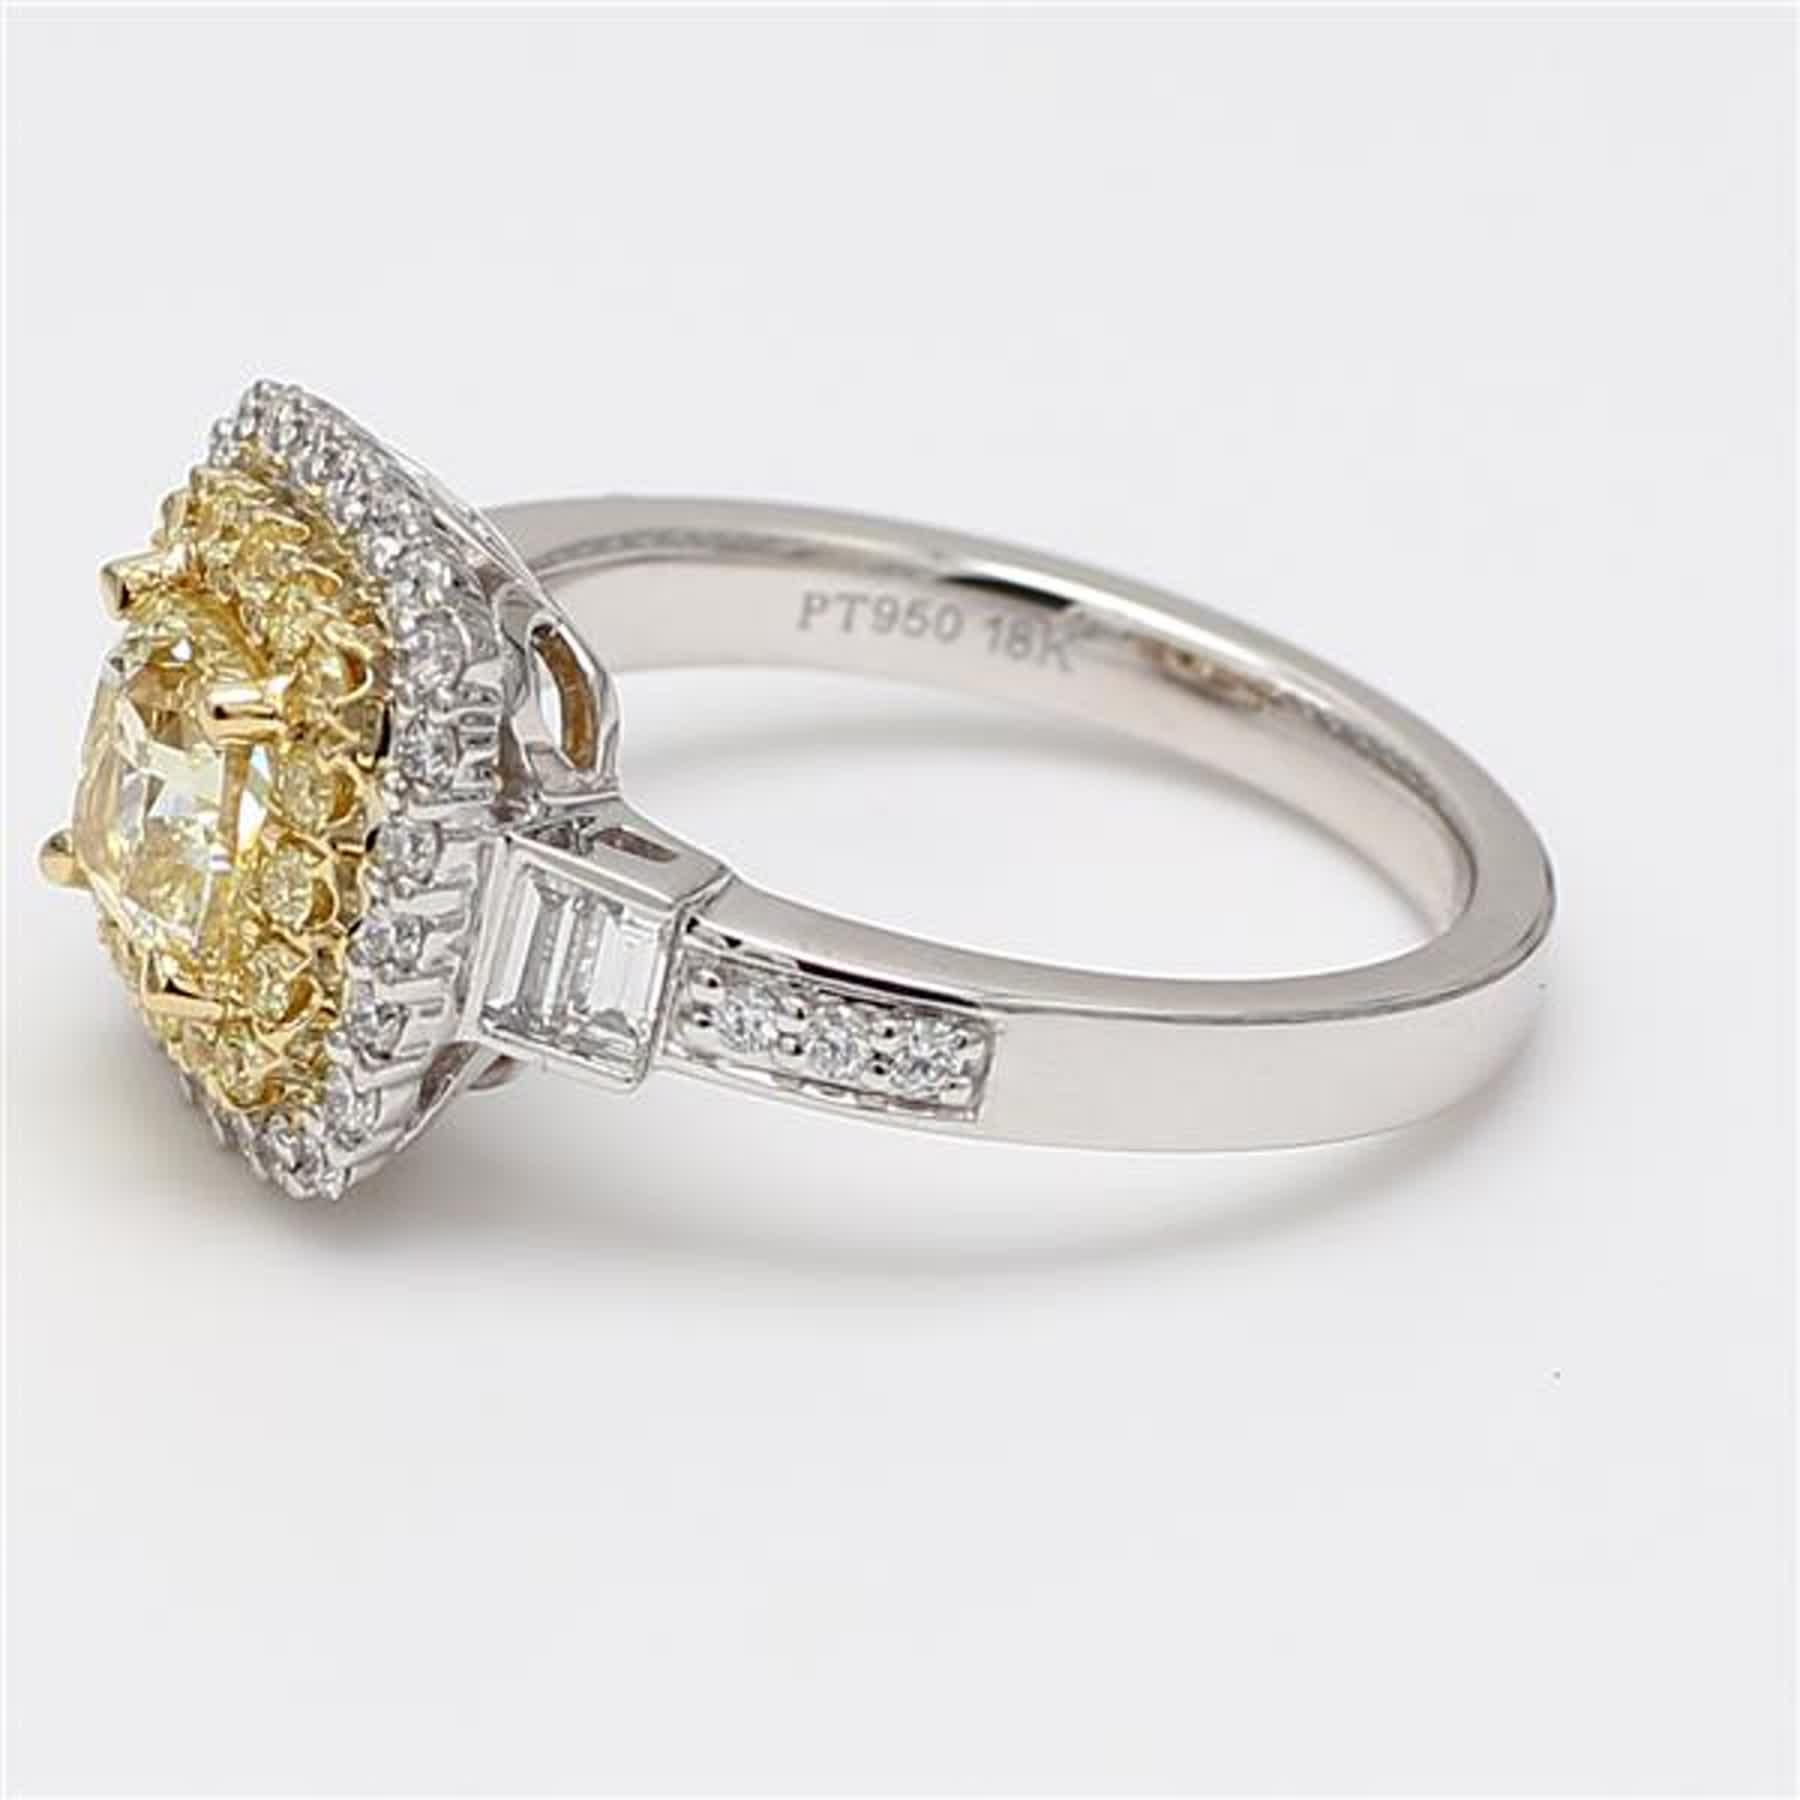 Contemporary GIA Certified Natural Yellow Cushion and White Diamond 1.68 Carat TW Plat Ring